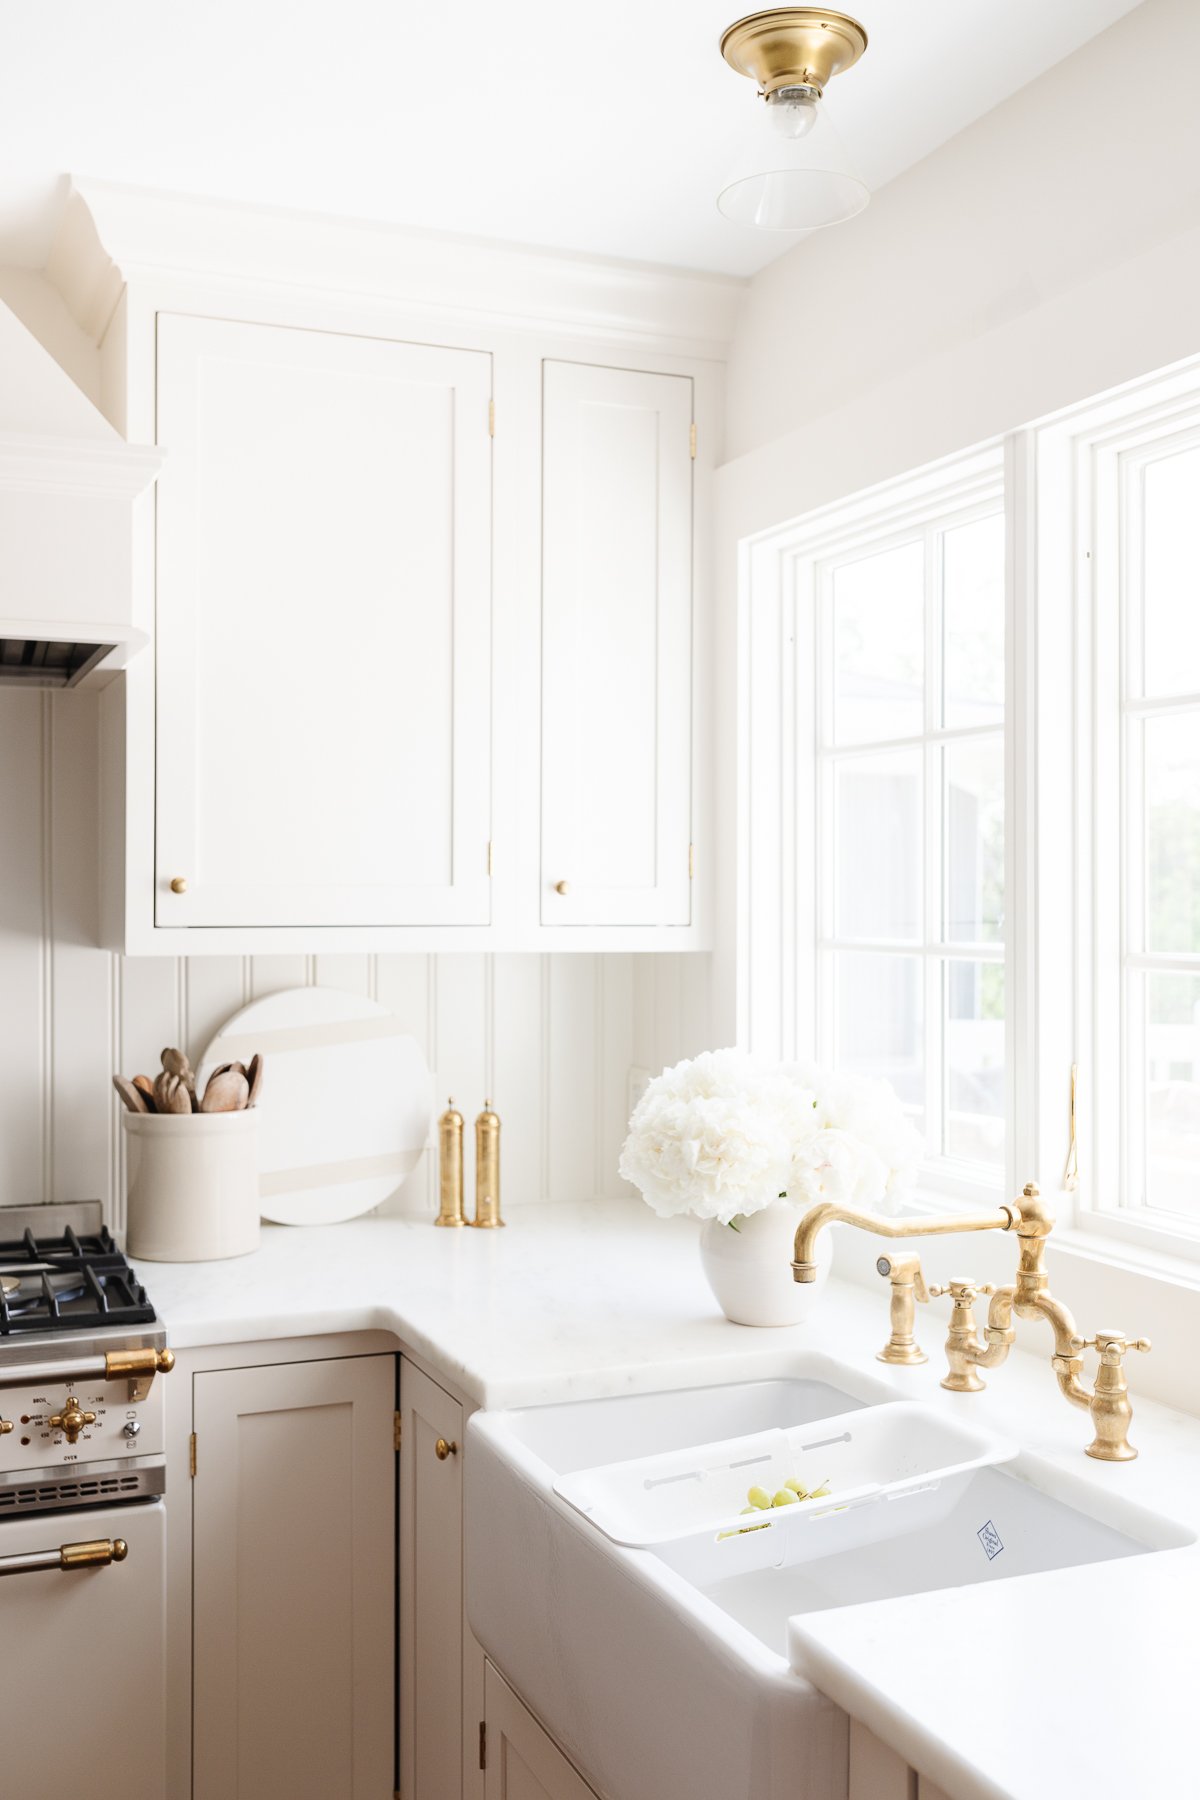 A cream kitchen with marble countertops with an eased edge.